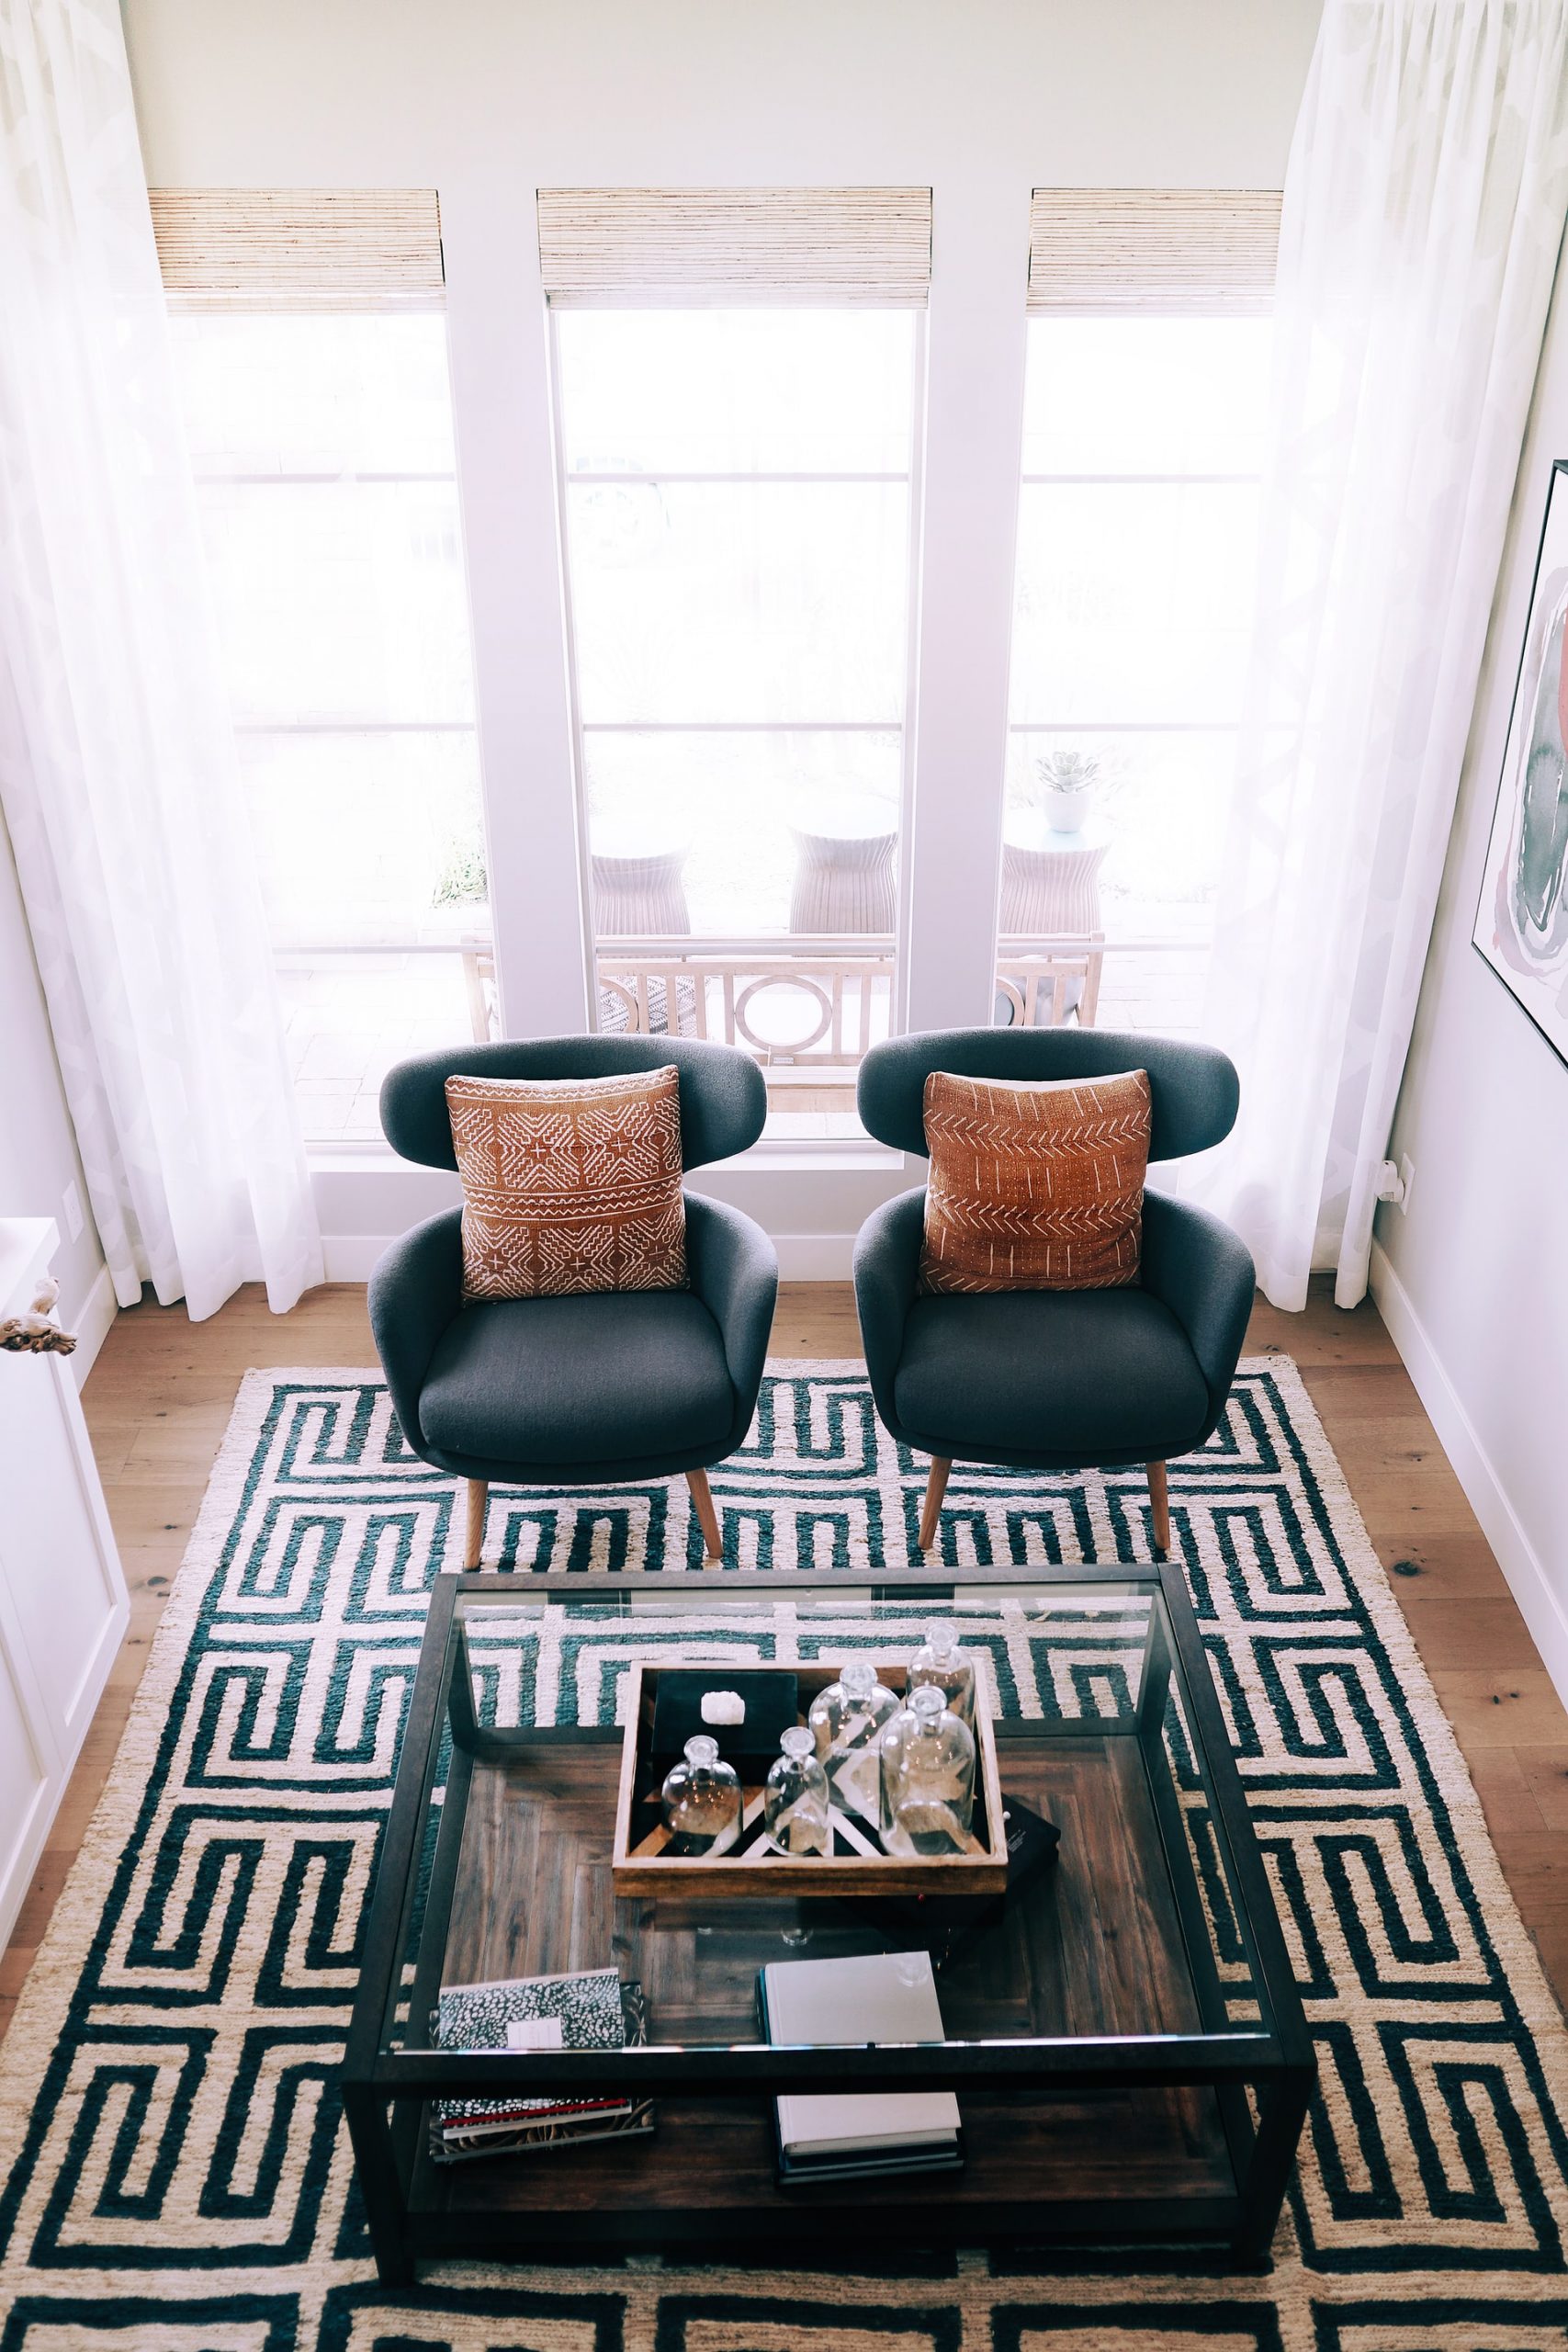 A living room with two chairs and rug